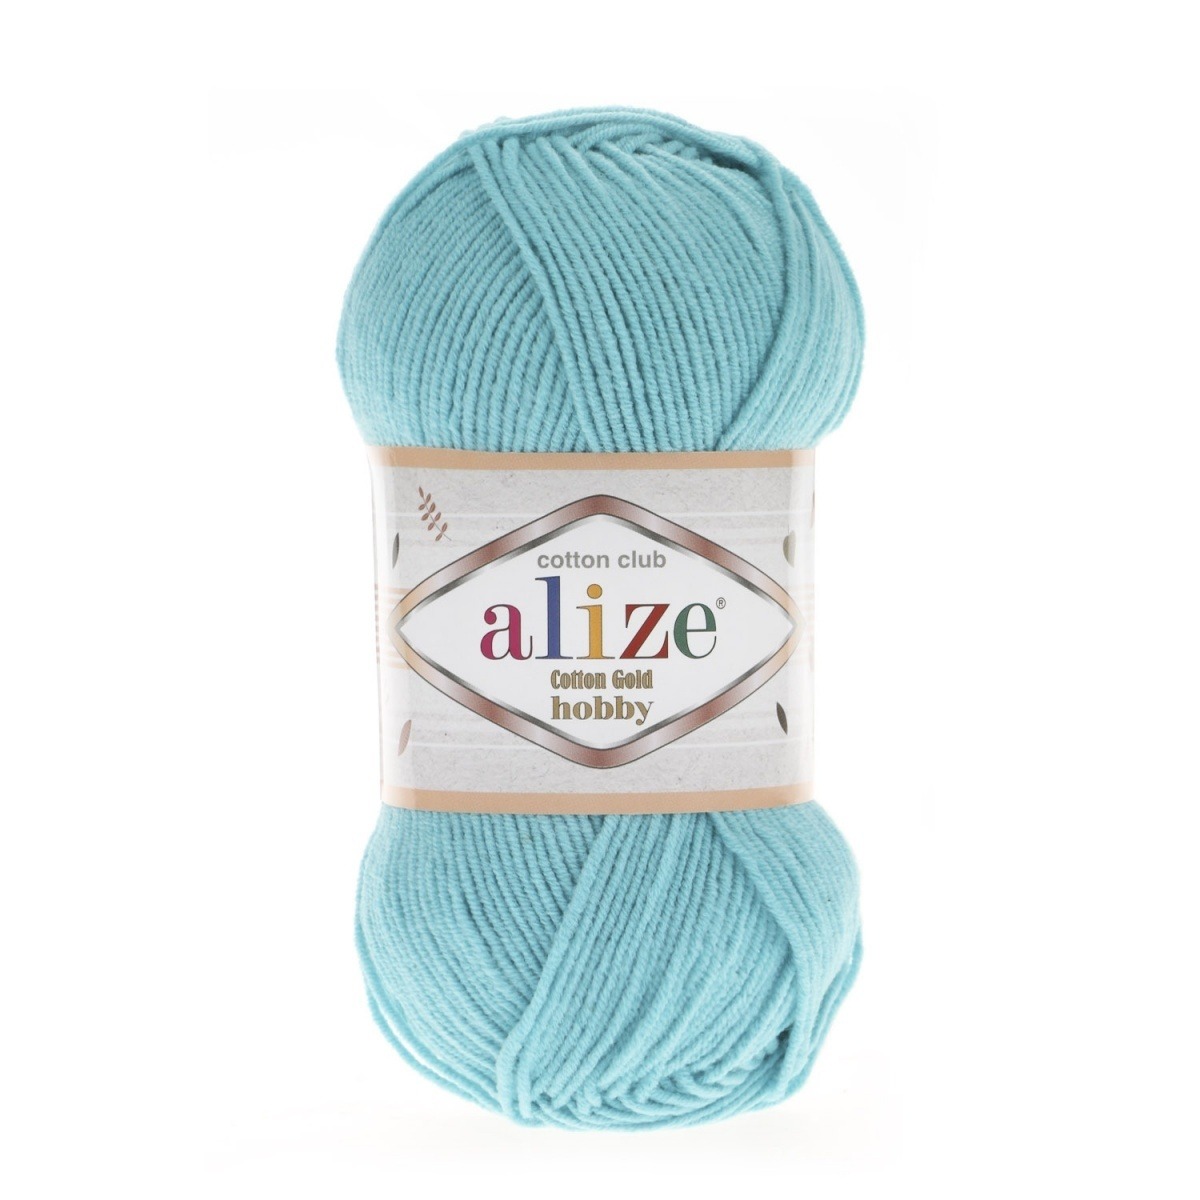 Alize "Cotton gold hobby" (287)